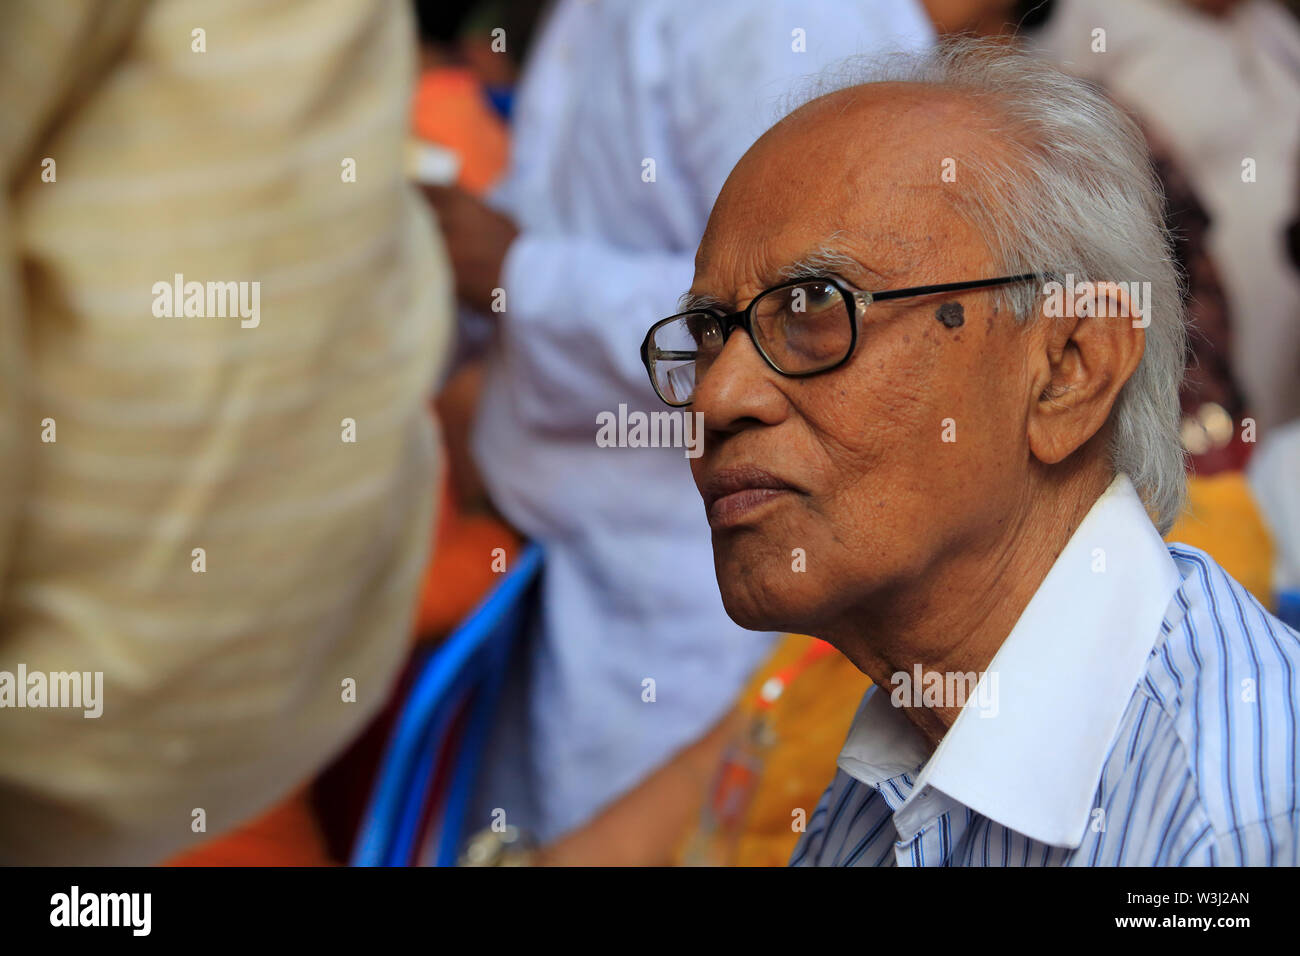 Ahmed Rafiq (born 12 September 1929) is a Bangladeshi language movement activist, writer, and researcher on Rabindranath Tagore and his literature. He Stock Photo